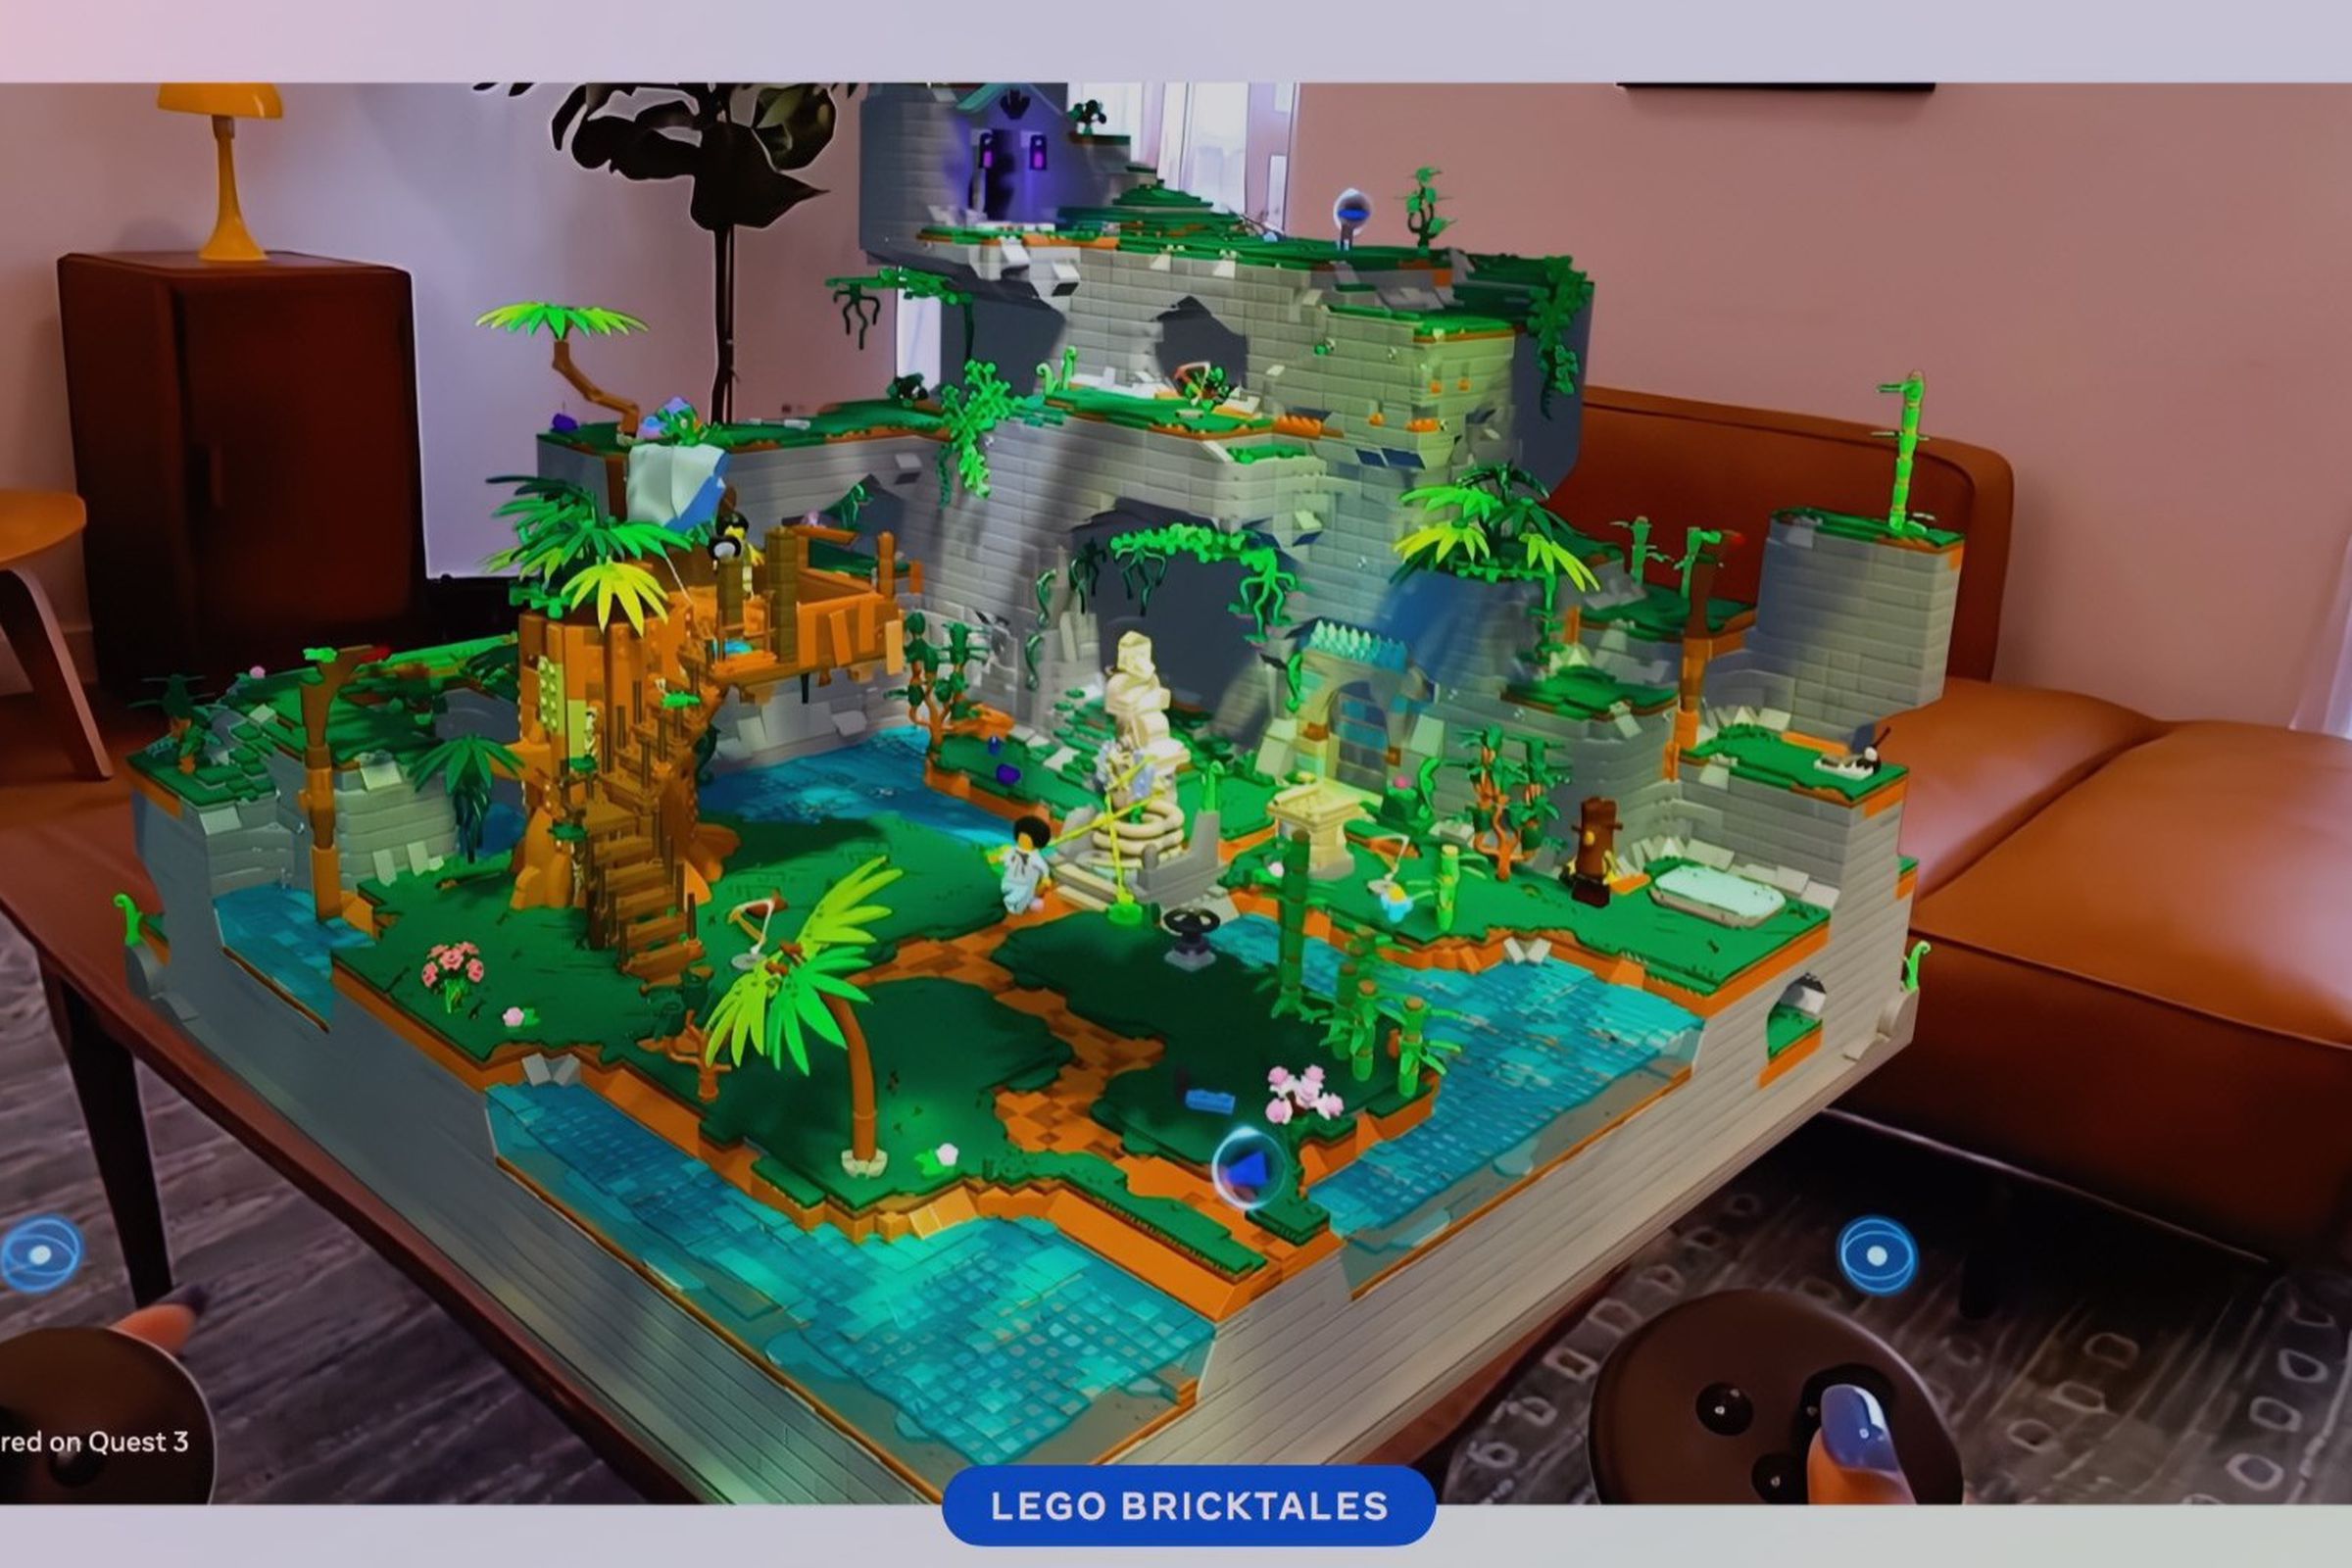 A virtual lego island paradise on a real-world living room table, with a couch in the background